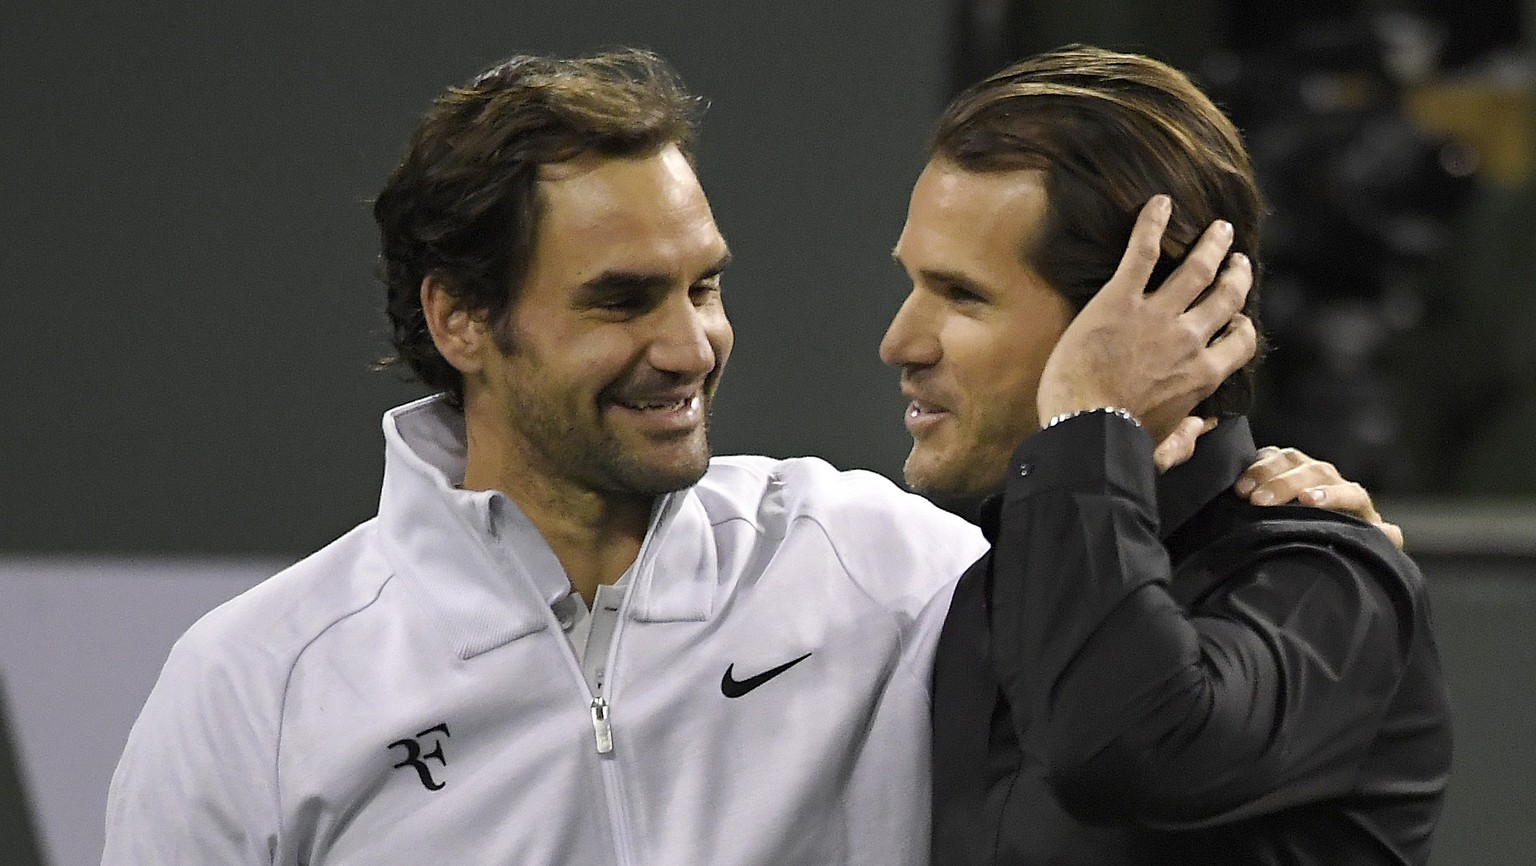 Roger Federer, left, of Switzerland, greets Tommy Haas, of Germany, after Haas announced his retirement following Federer&#039;s quarterfinal match against Chung Hyeon at the BNP Paribas Open tennis t ...